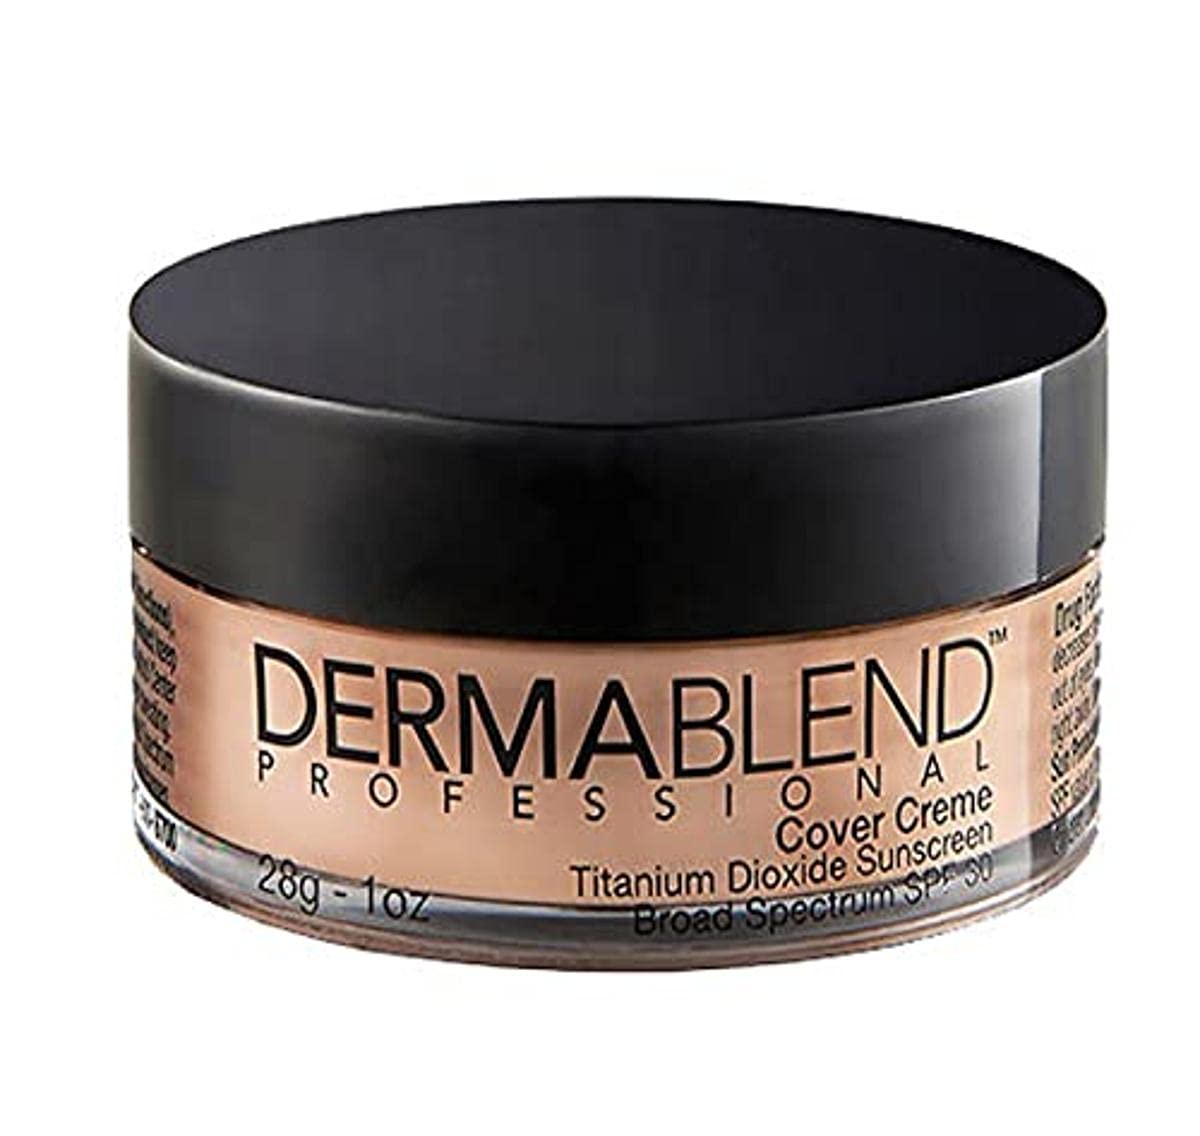 Dermablend Professional Cover Creme